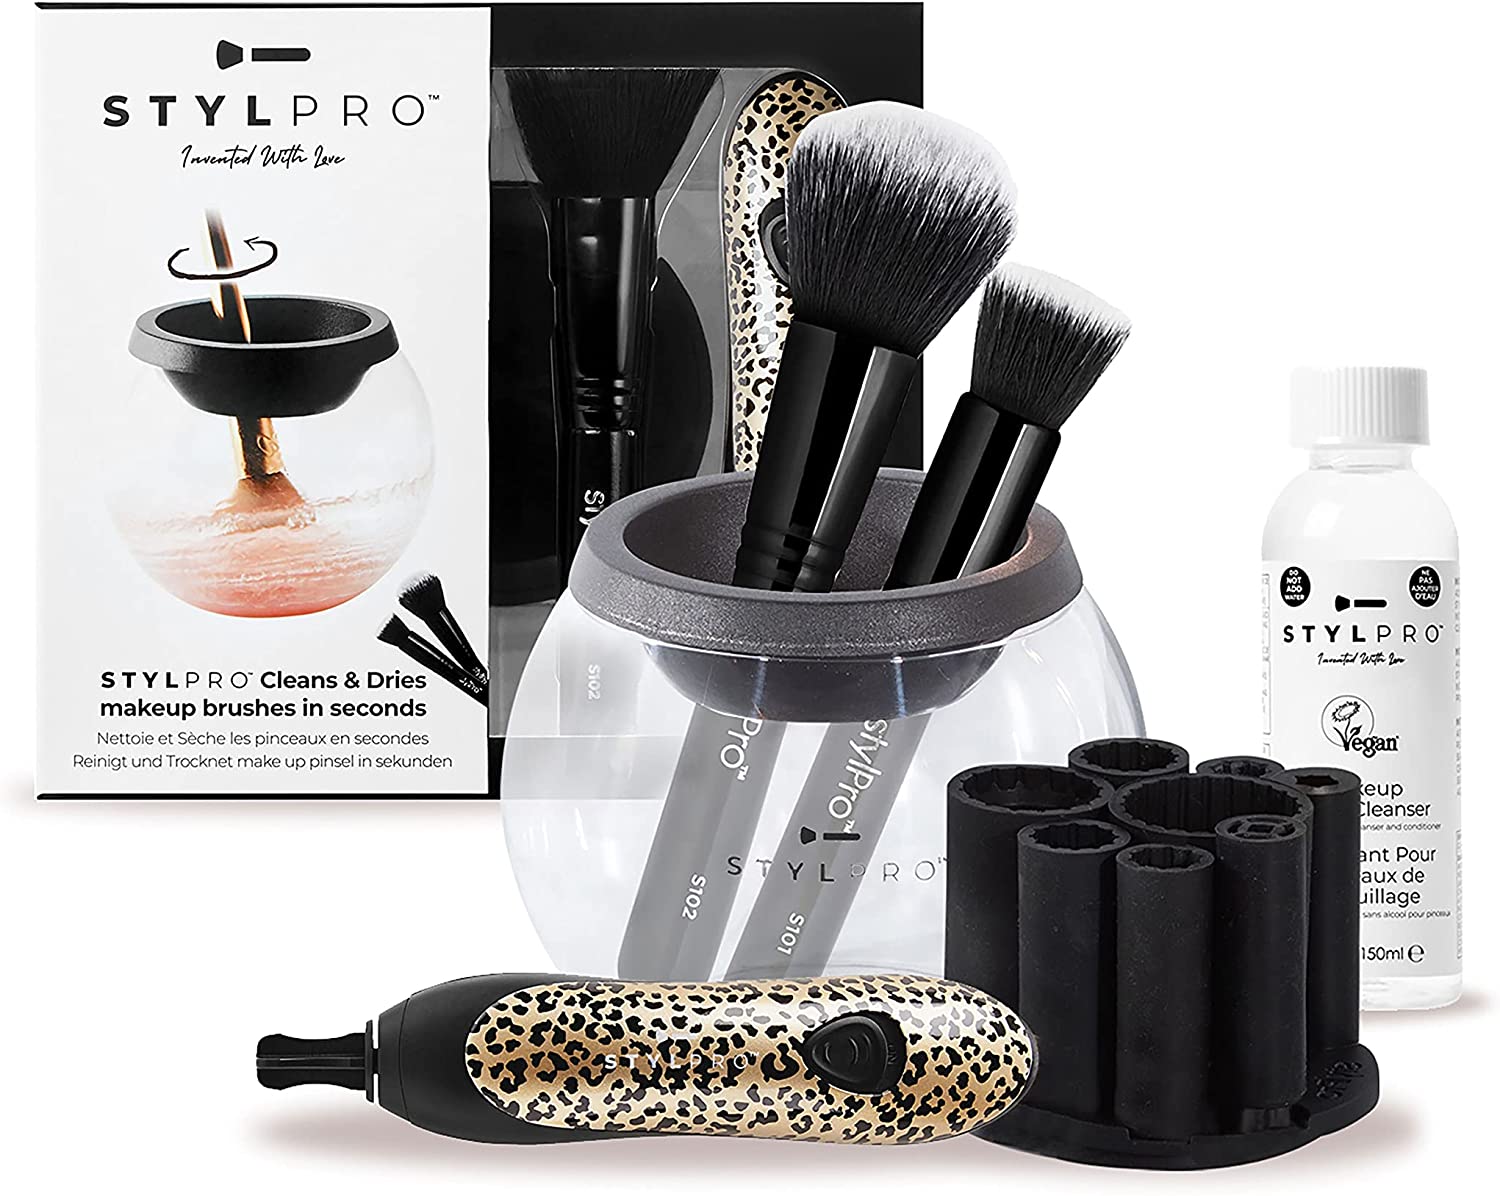 STYLPRO Gift Set Kit: Electric Makeup Brush Cleaner and Dryer Machine with 8 Brush Collars, Spinning Brush Cleaner with Bowl bundle (with and without cleaning solution included